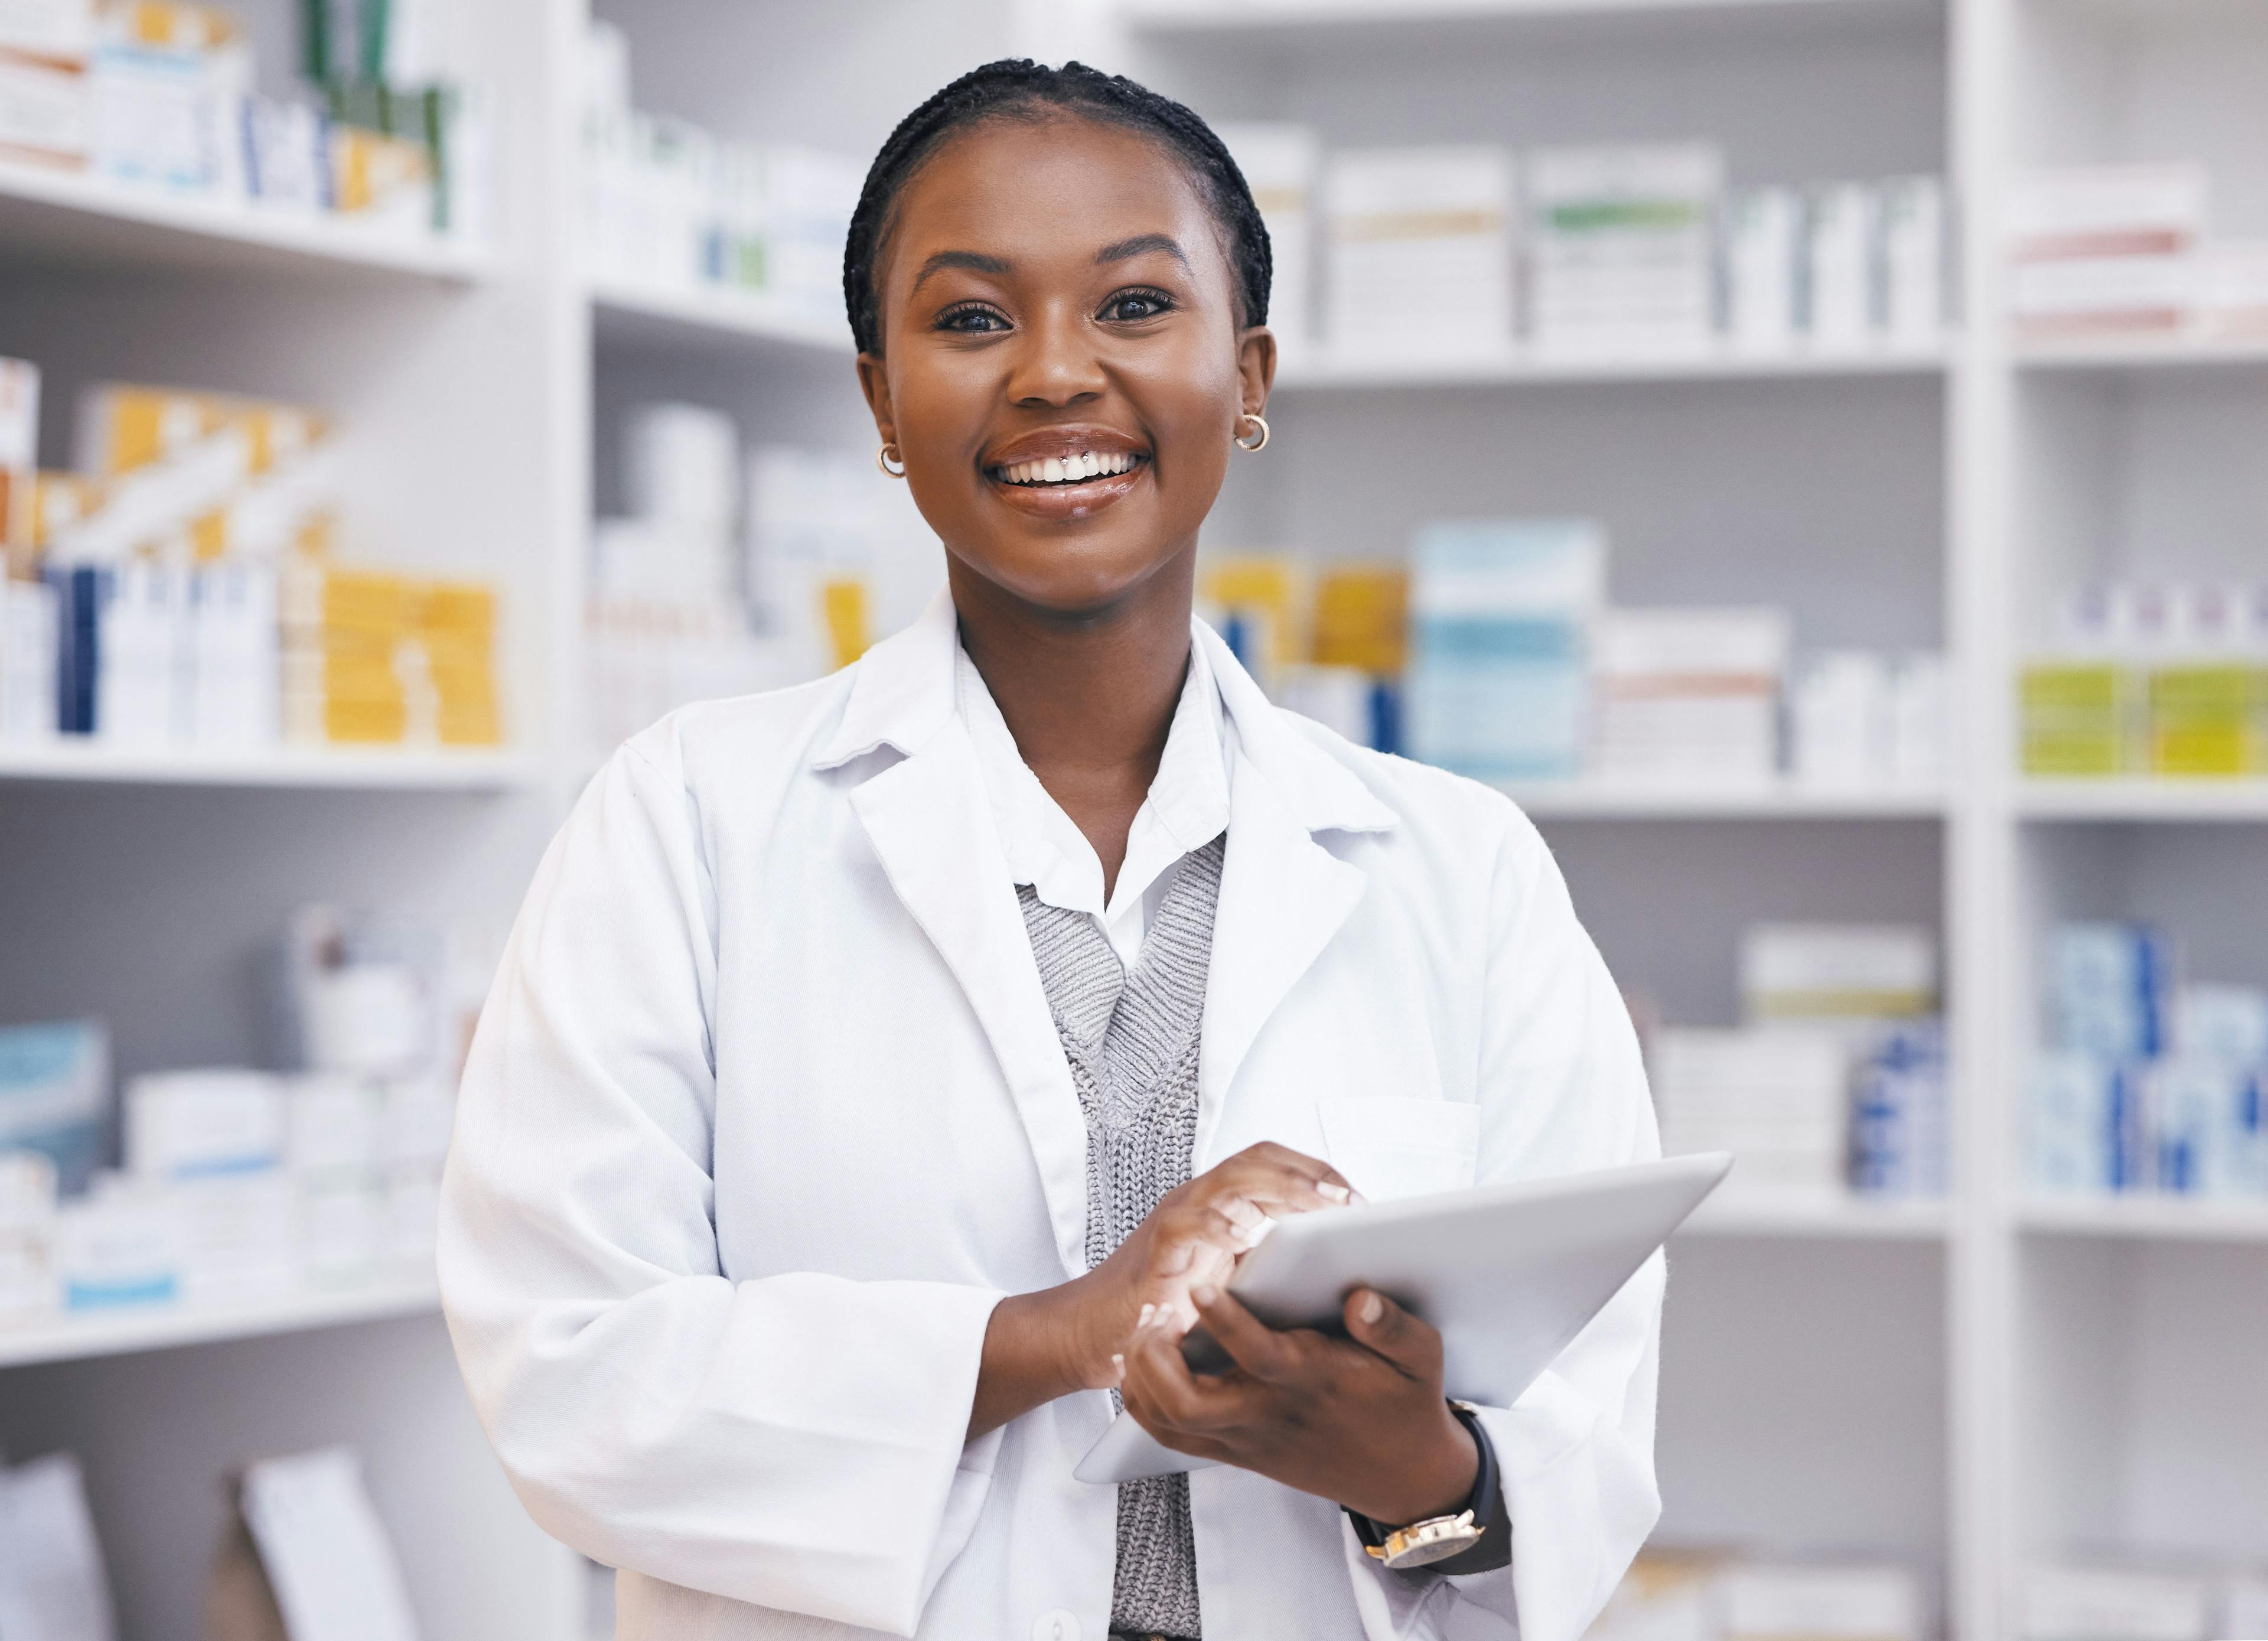 Expert: Black Students Face Unique Challenges When Entering, Considering Pharmacy Residency Programs